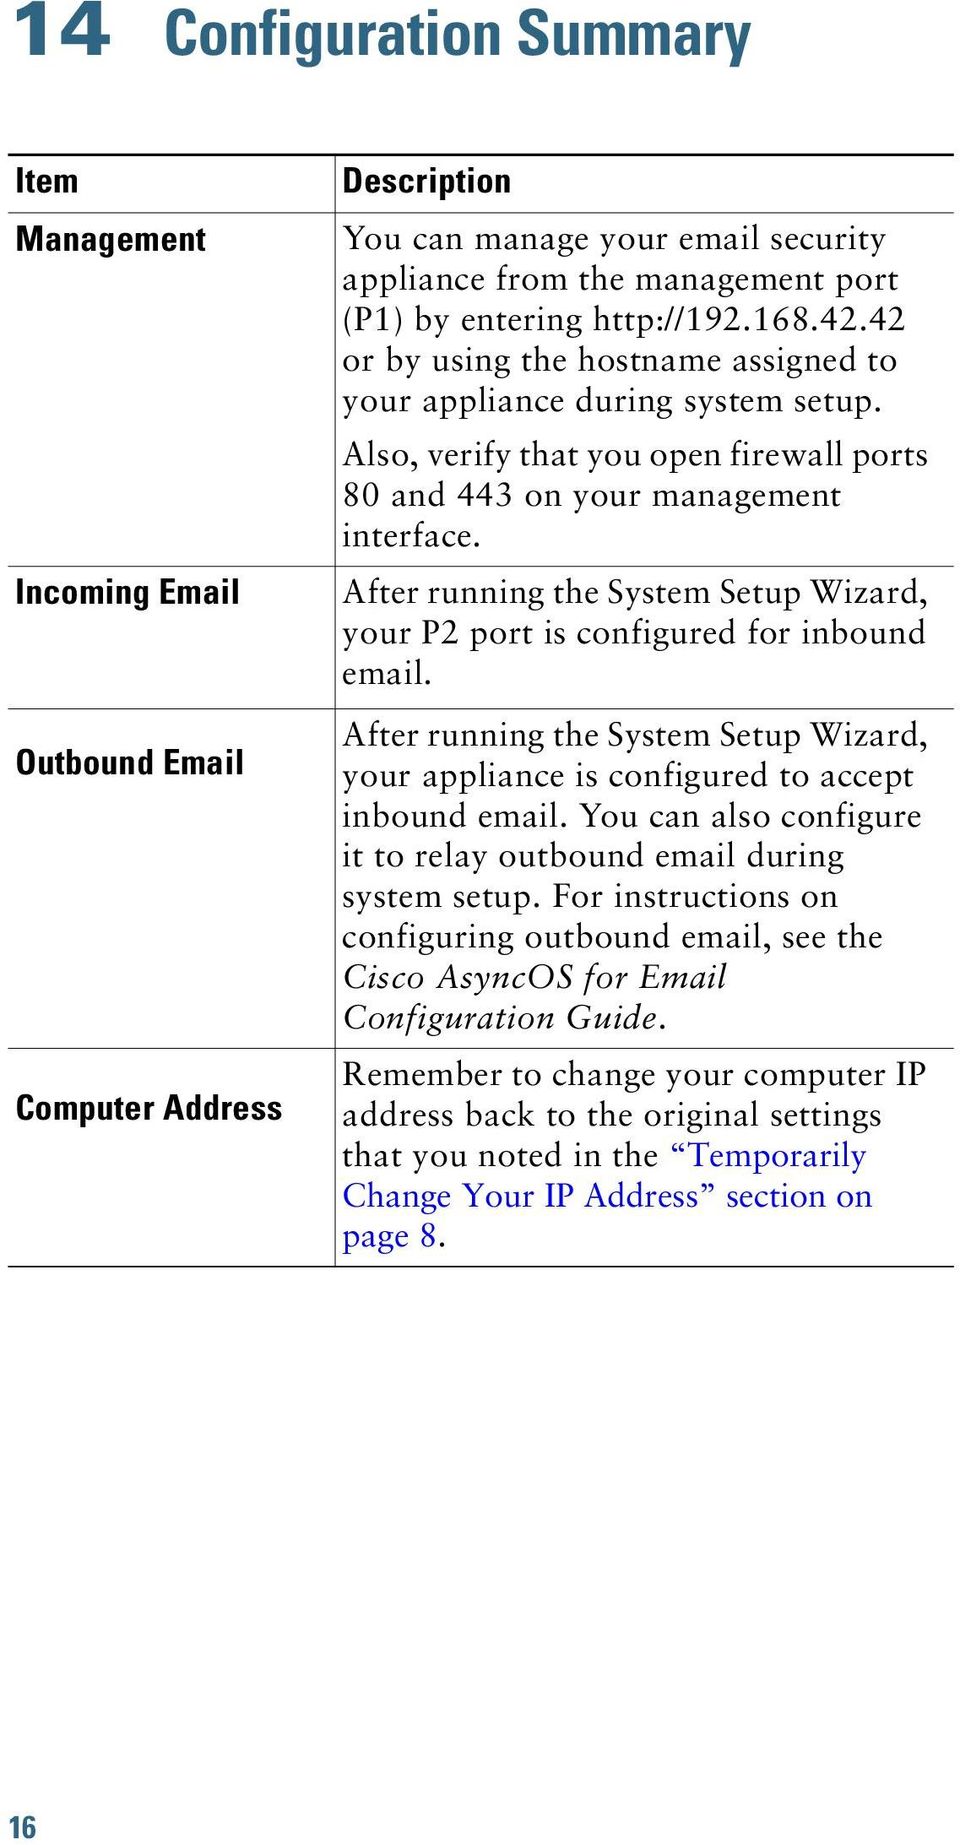 After running the System Setup Wizard, your P2 port is configured for inbound email. After running the System Setup Wizard, your appliance is configured to accept inbound email.